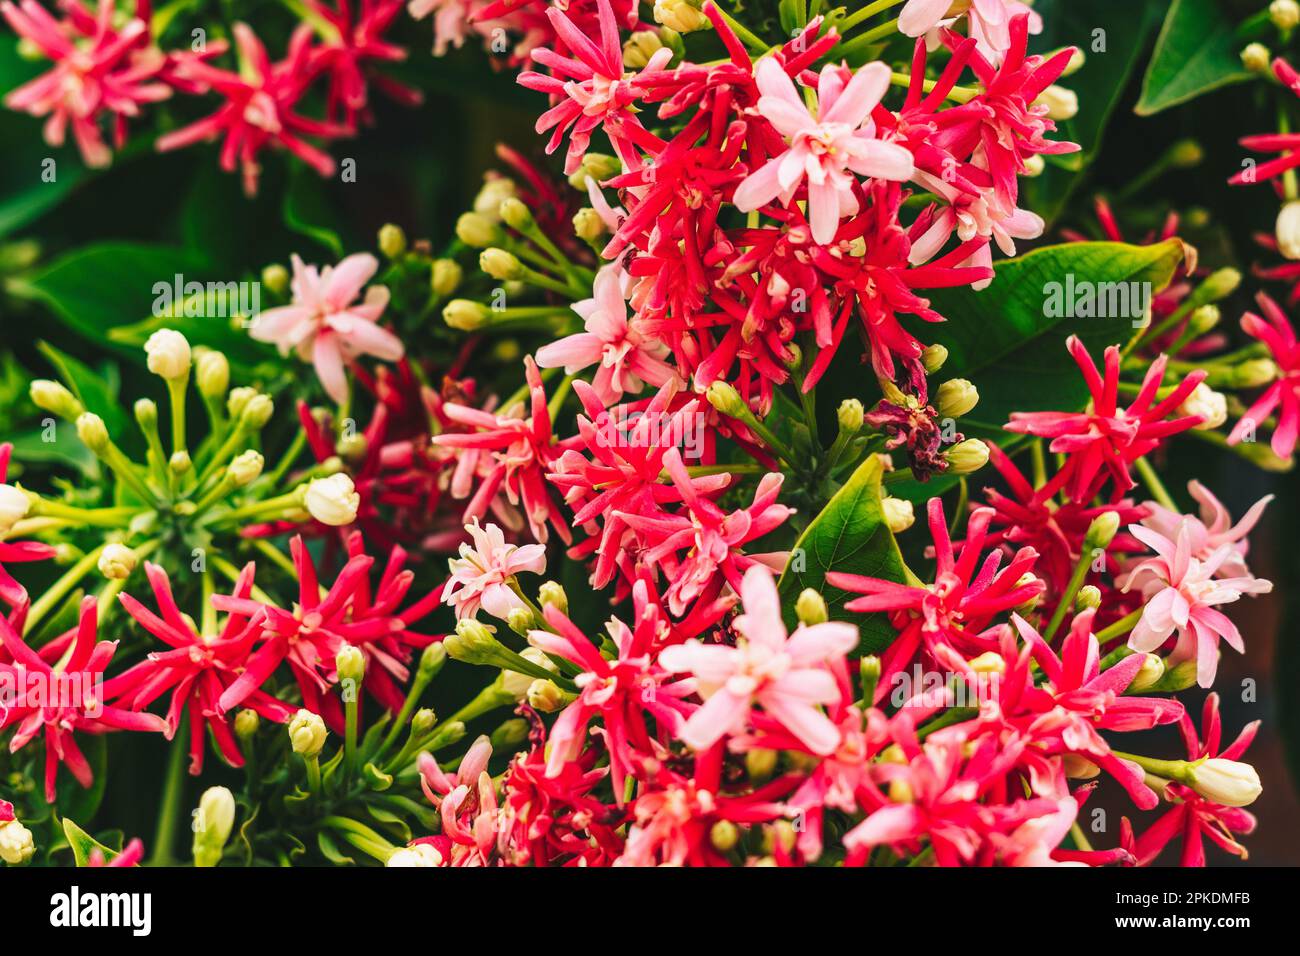 A close up of a plant with red flowers Stock Photo